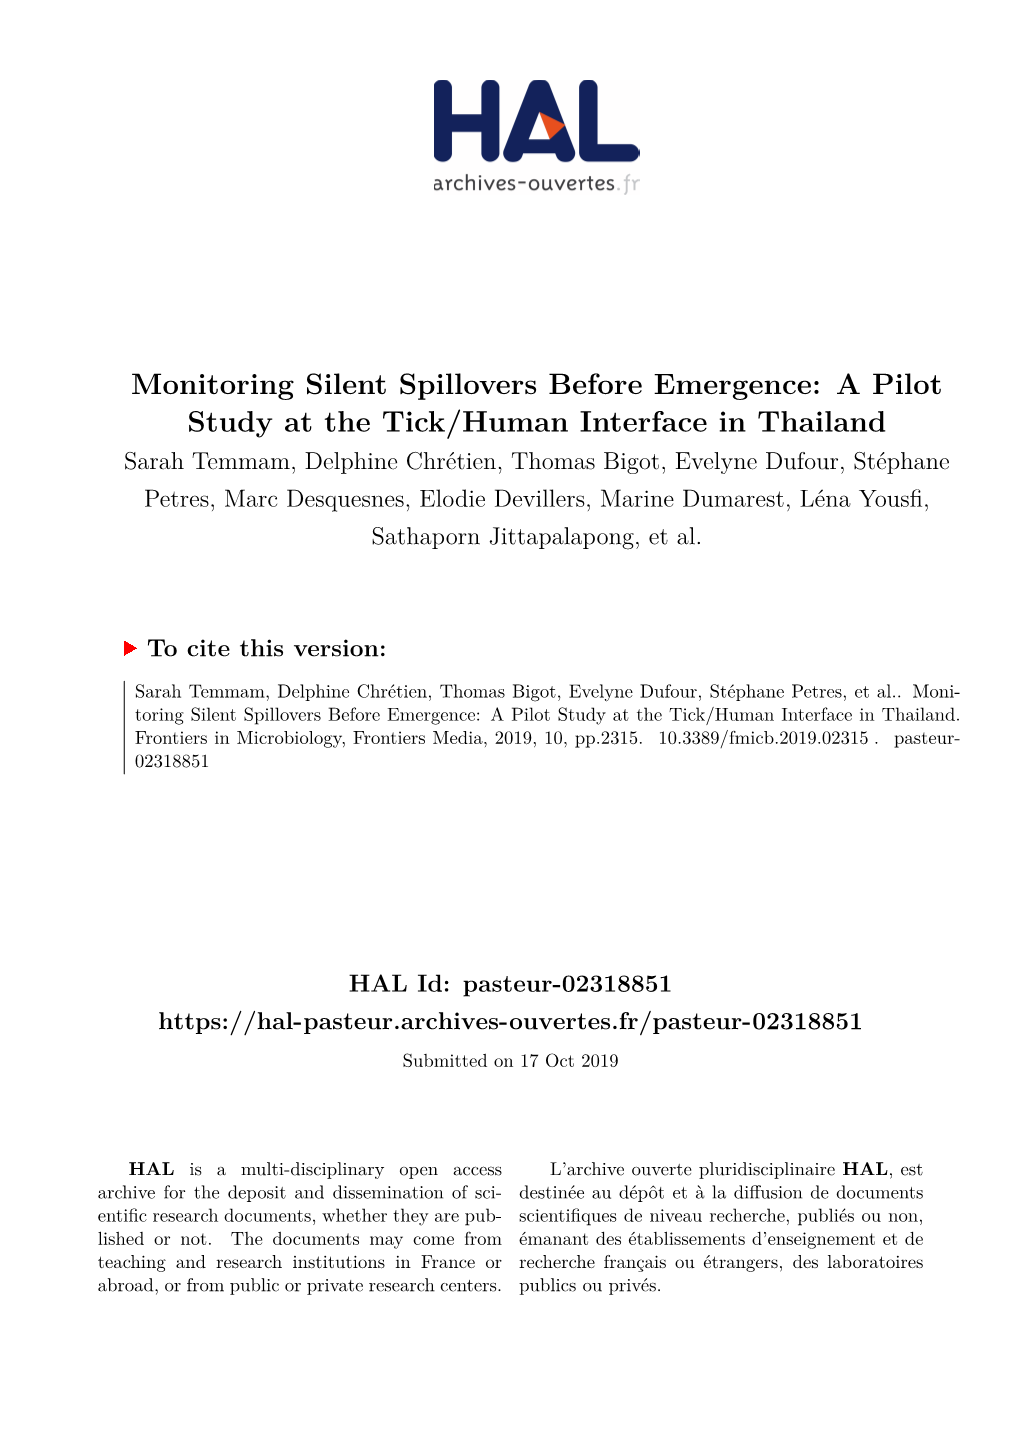 Monitoring Silent Spillovers Before Emergence: a Pilot Study at the Tick/Human Interface in Thailand